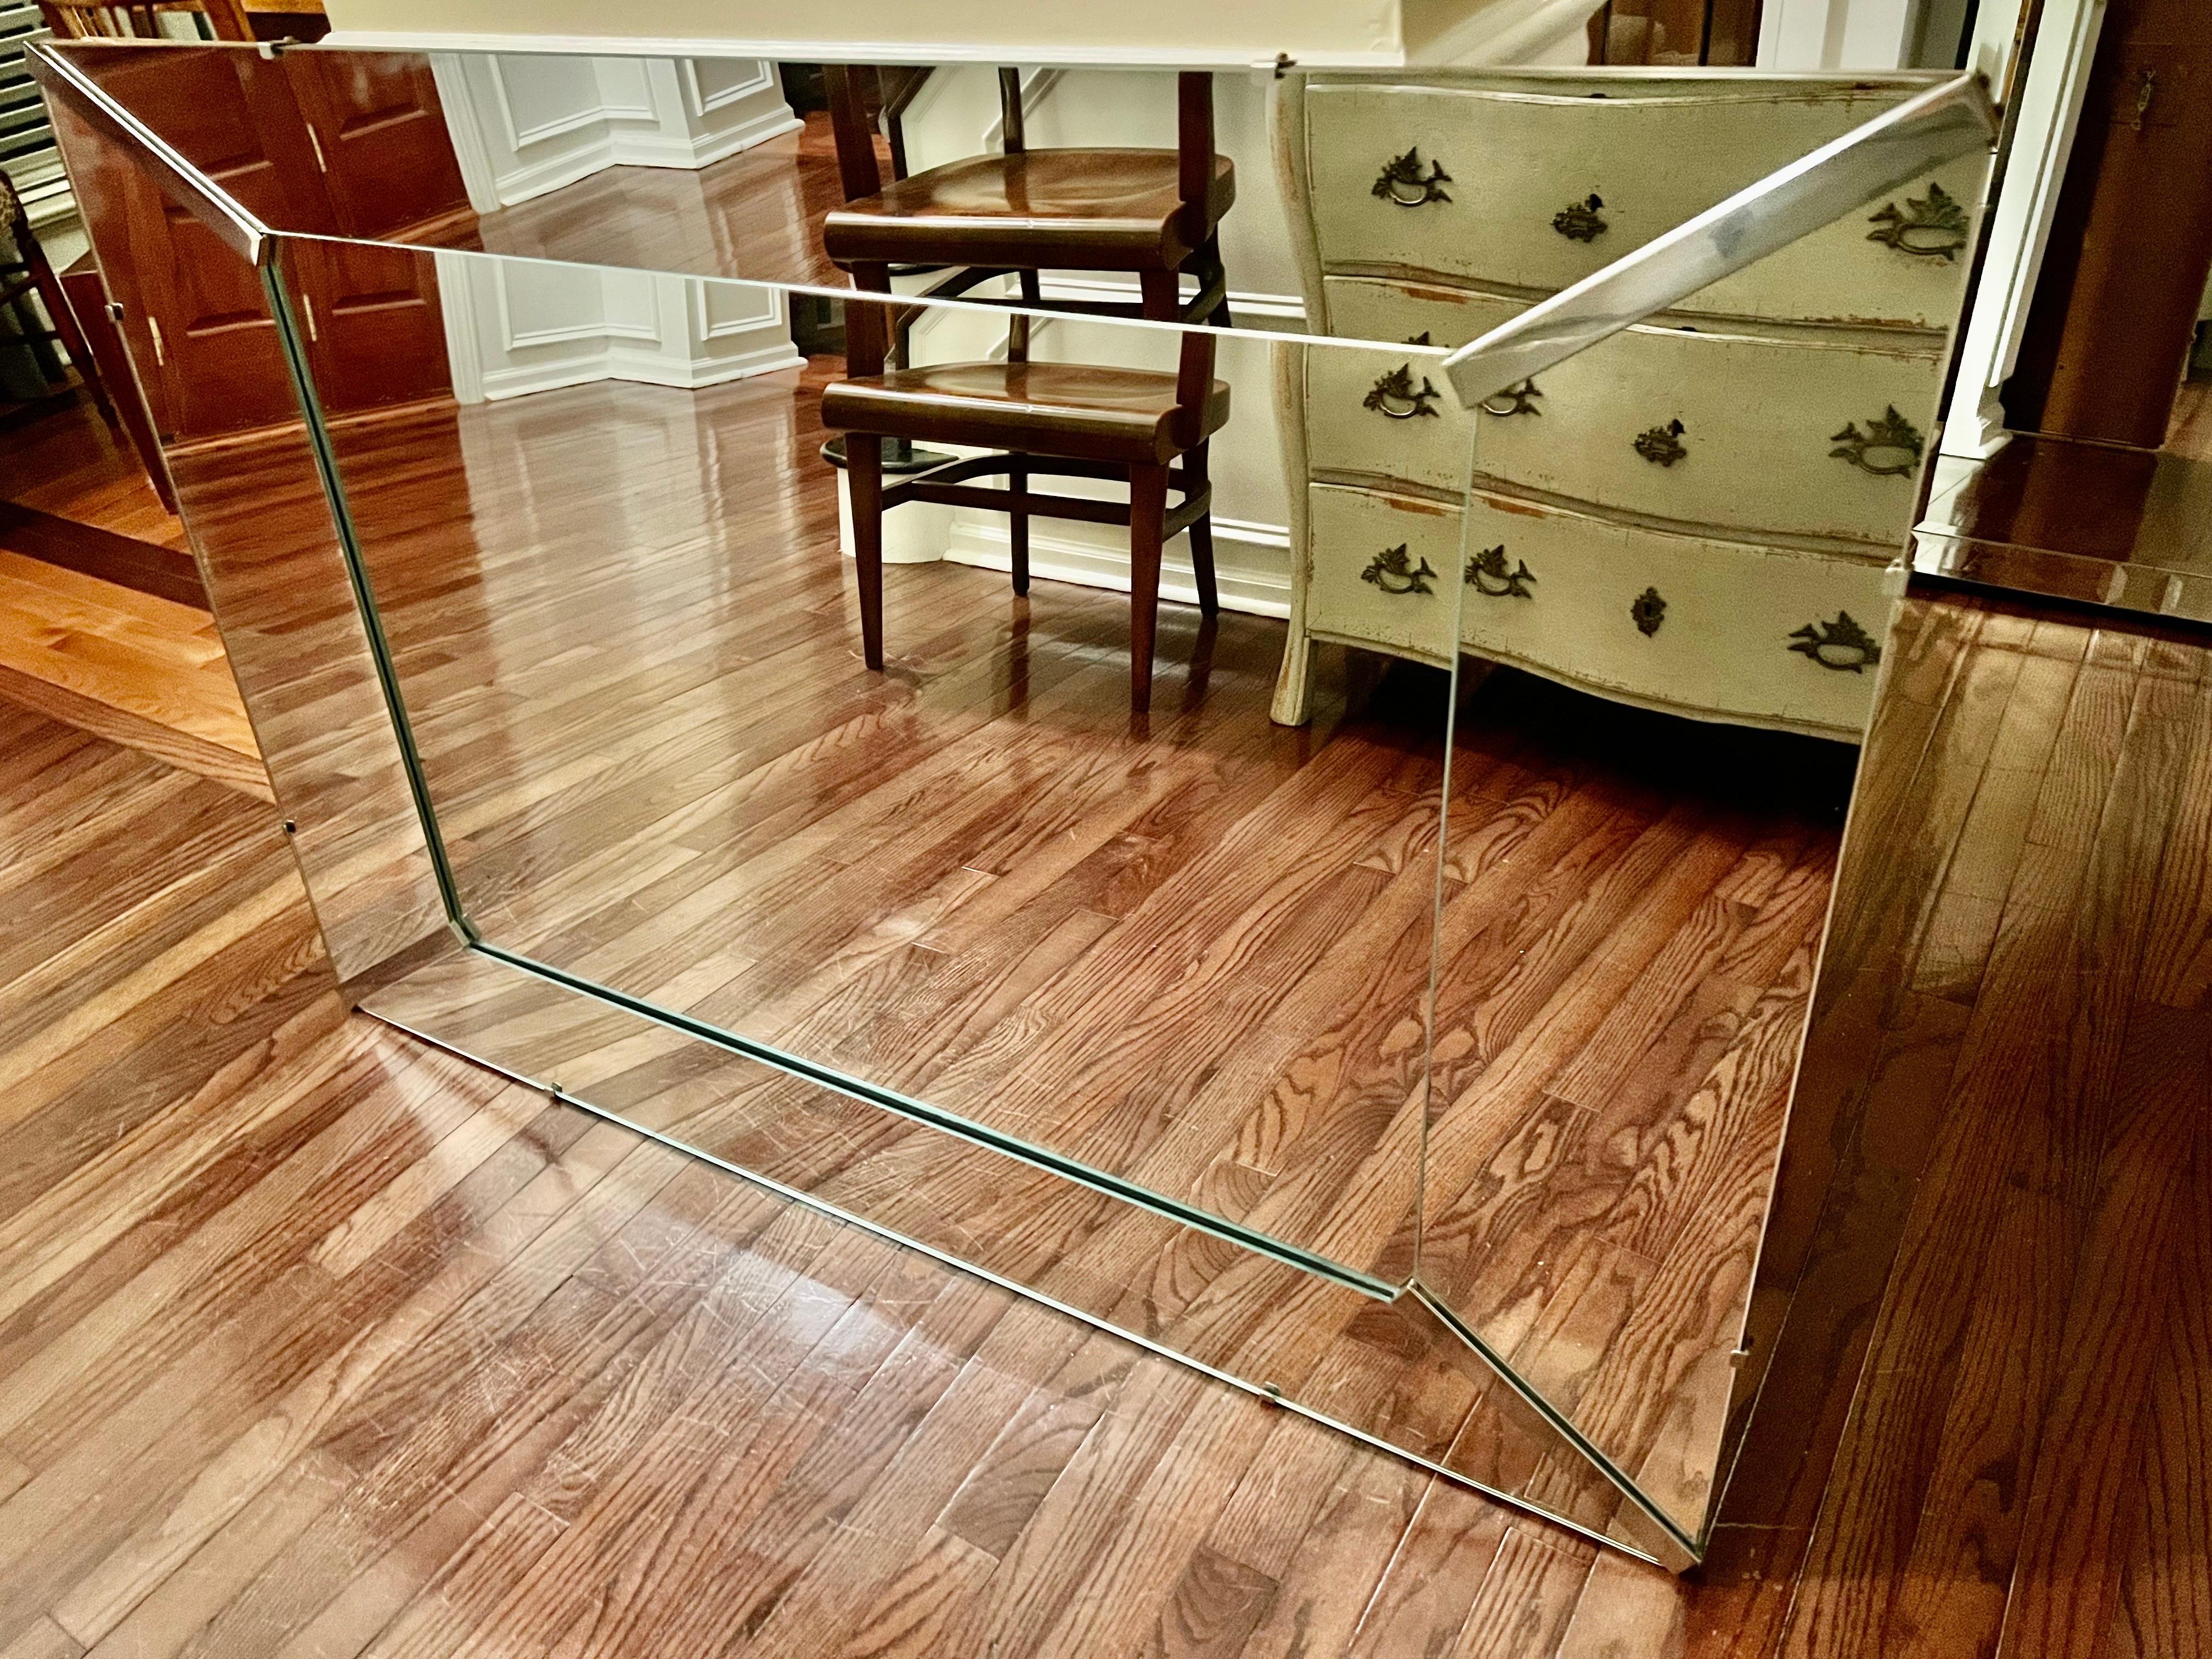 Large, elegant Hollywood Regency Venetian style mirror with a layered simple frame, circa 1940's. The corner pieces add dimension and depth to the beautiful design. A stunning mirror to coordinate with many styles.